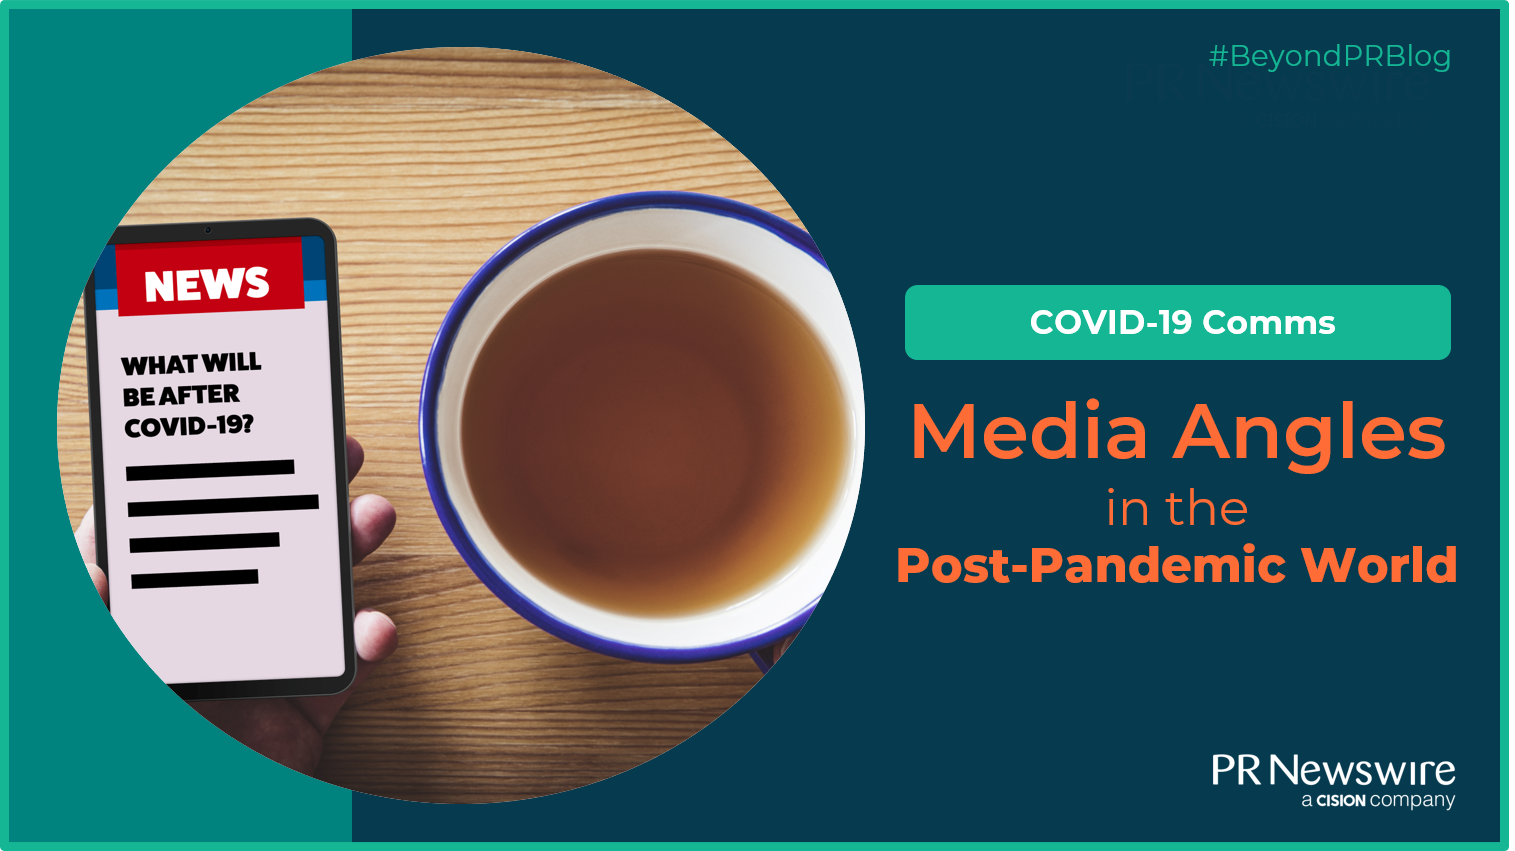 COVID-19 Media Angles in the Post Pandemic World